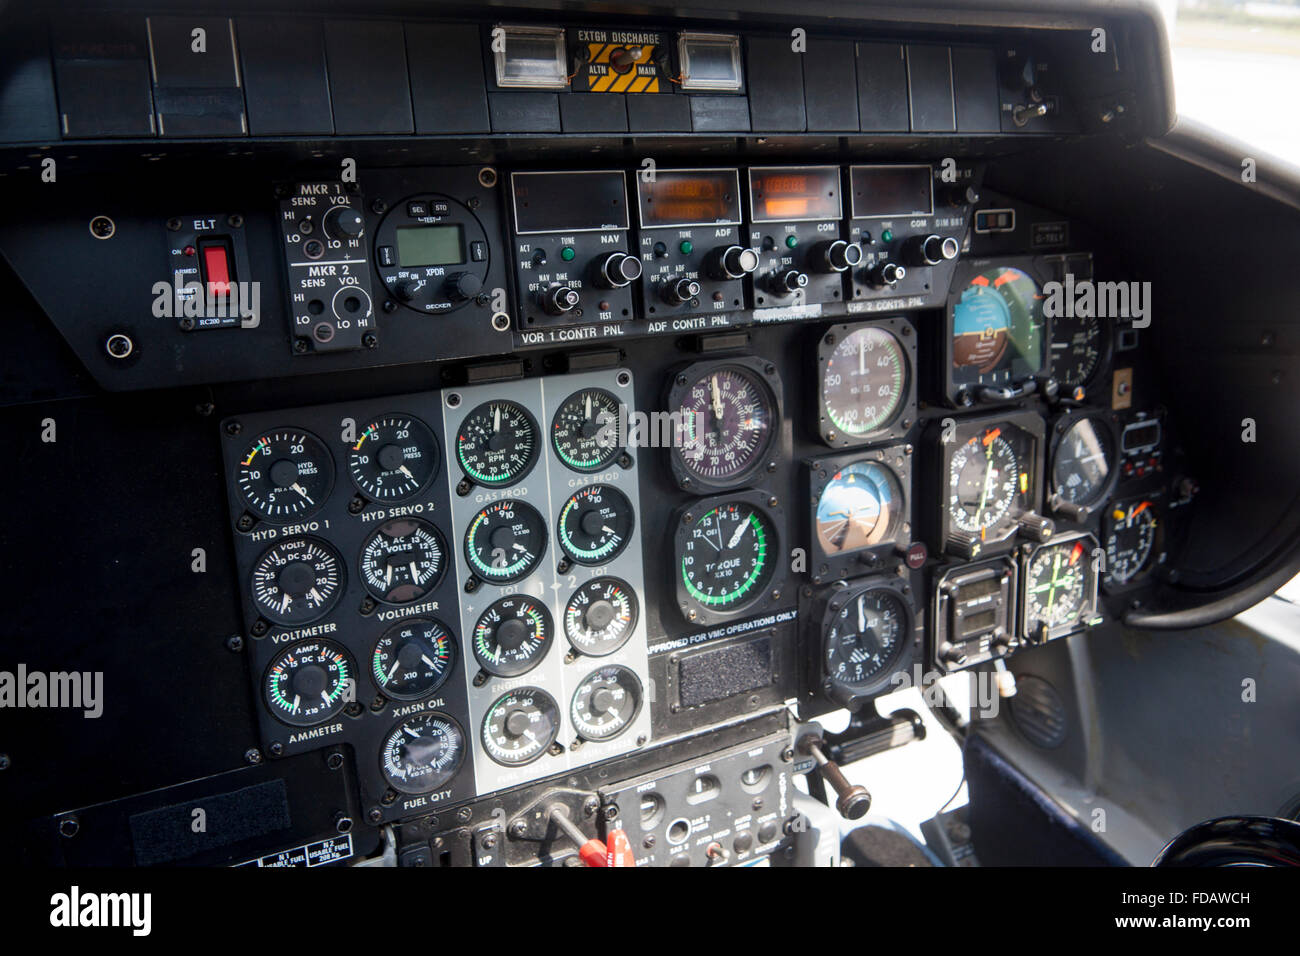 Helicopter control panel Stock Photo